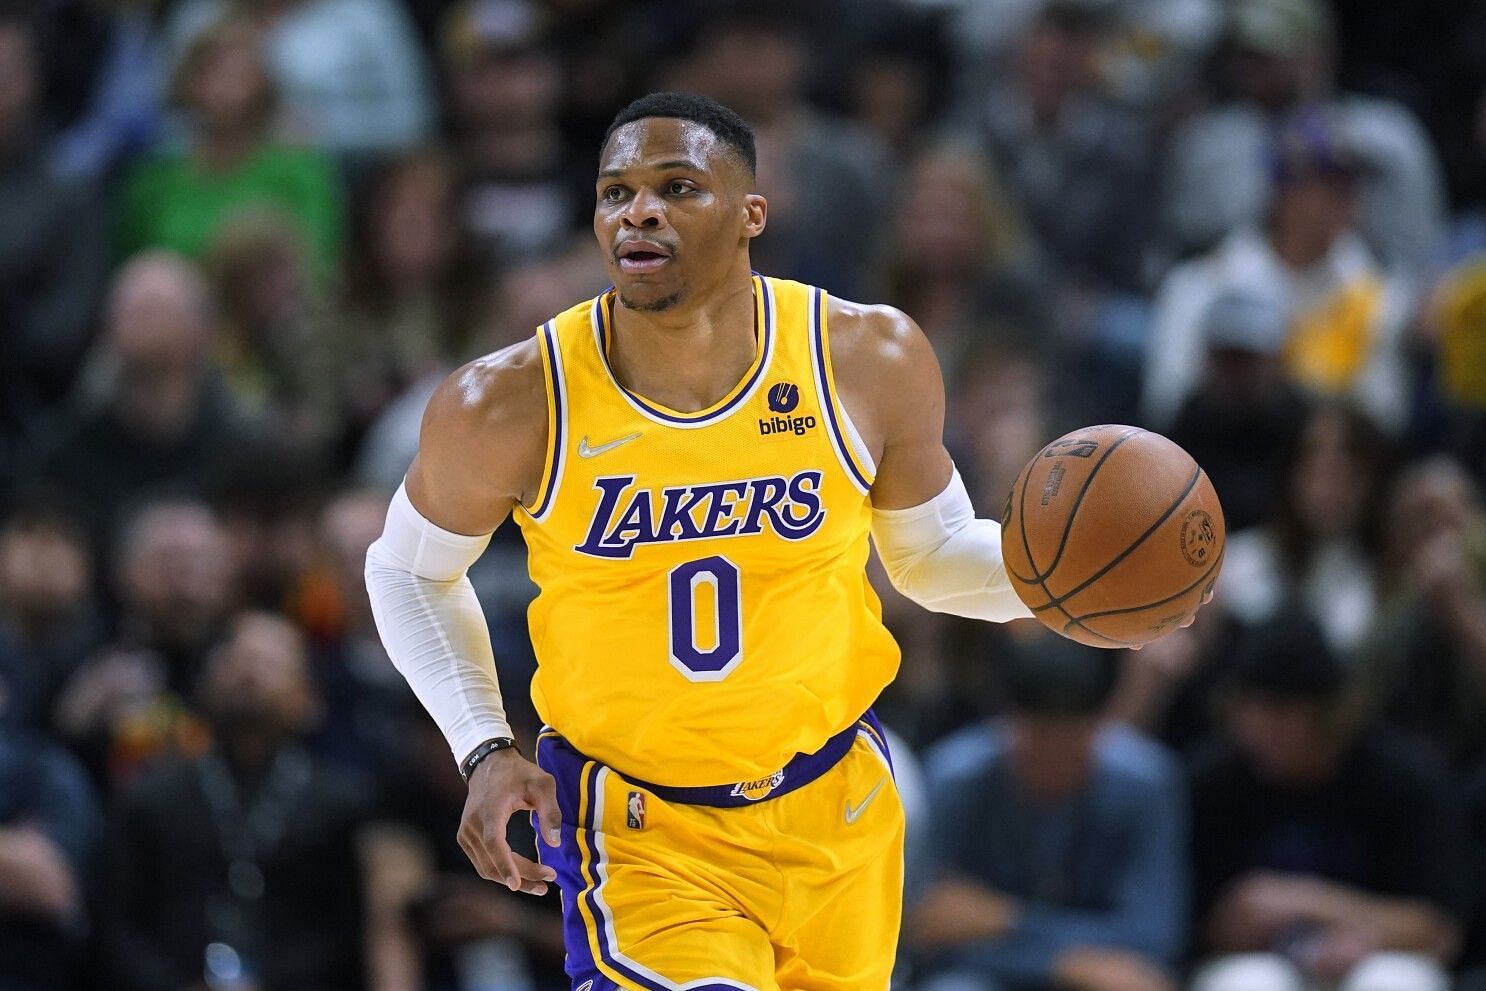 Every trade scenario involving Russell Westbrook requires the LA Lakers attaching at least one future first-round pick. [Photo: LA Times]